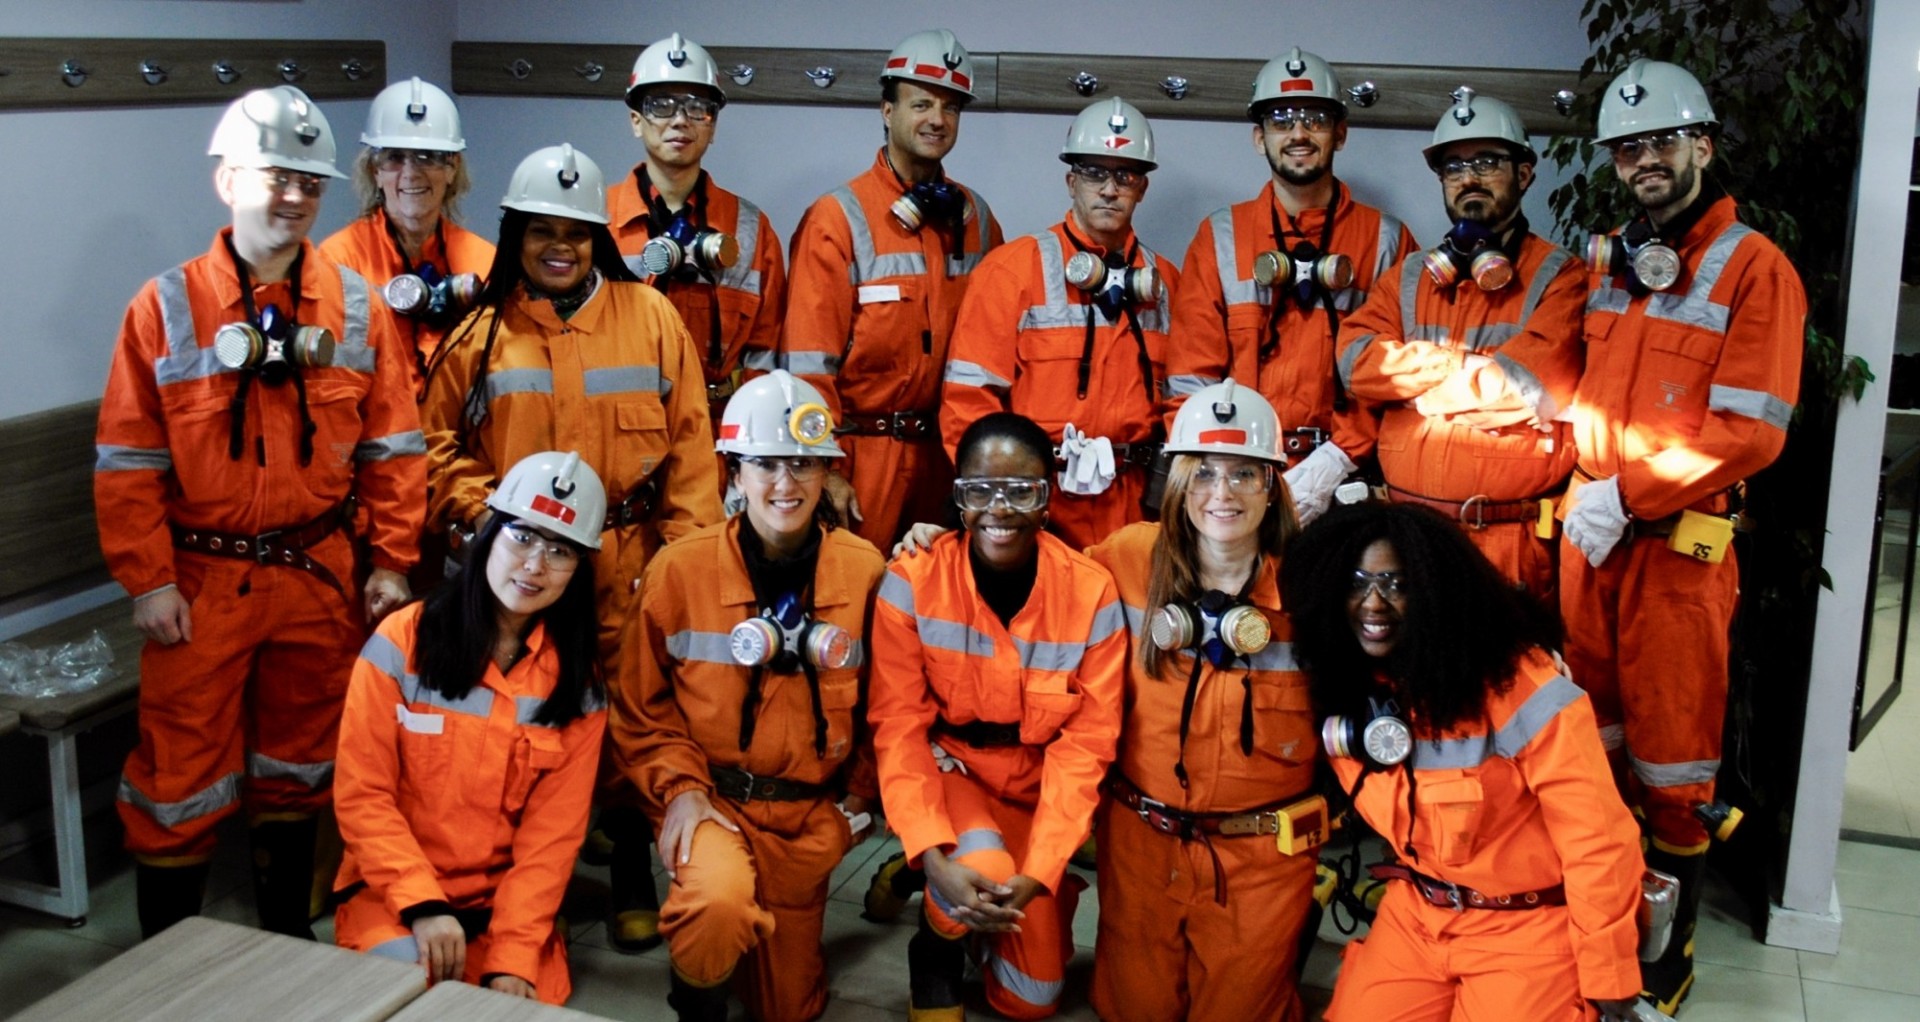 The SPS students at El Teniente, the world’s largest underground copper mine.